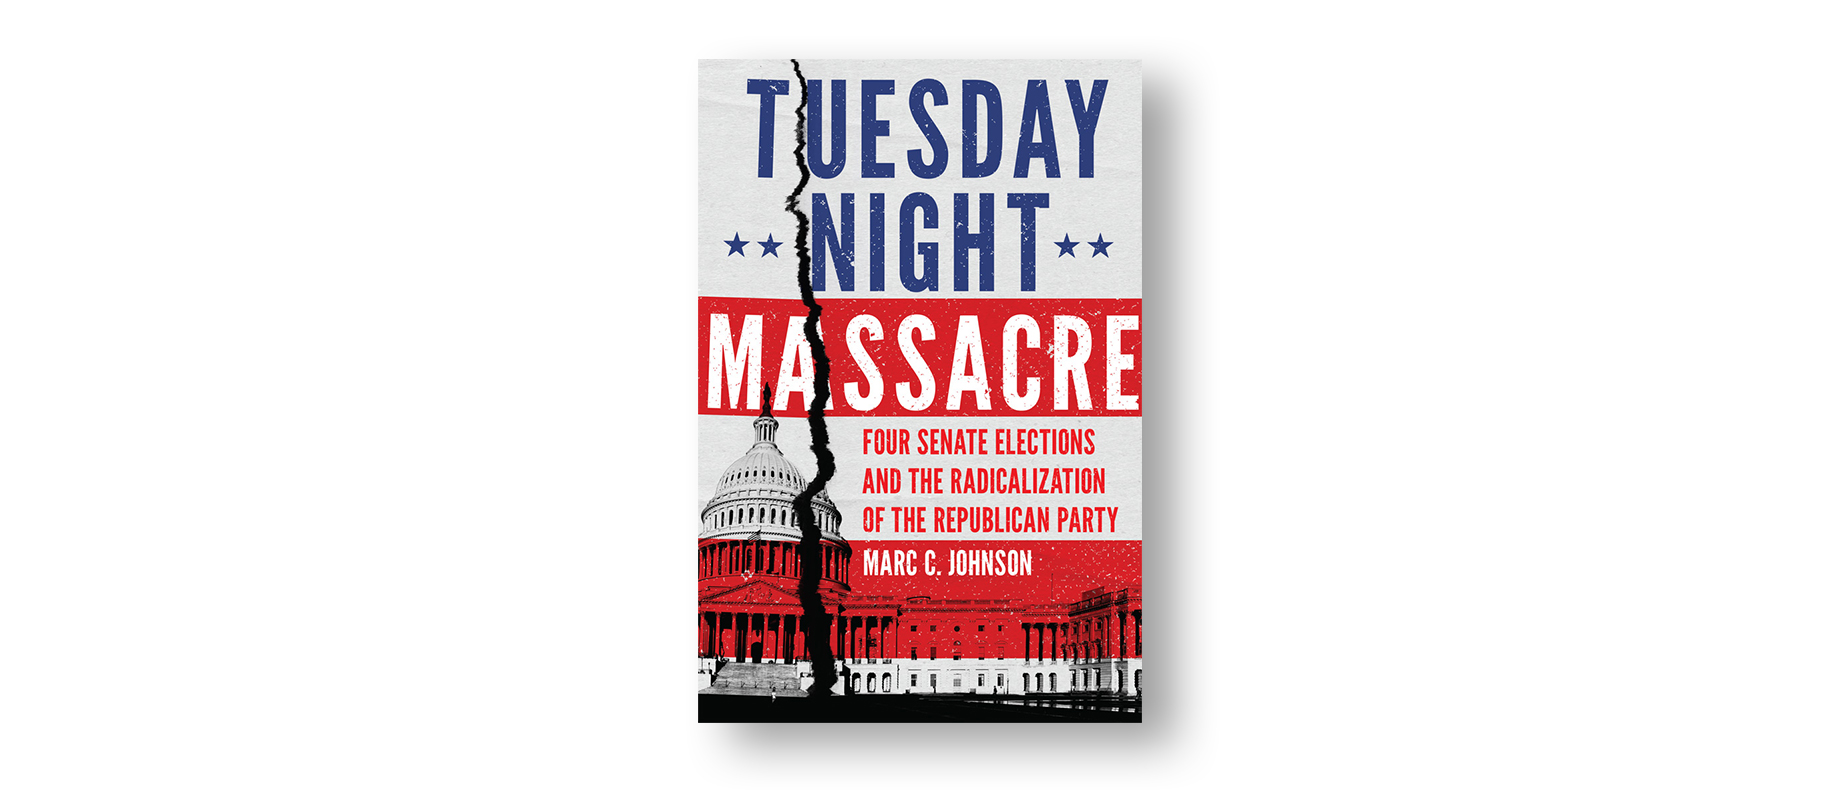 Book cover of "Tuesday Night Massacre"